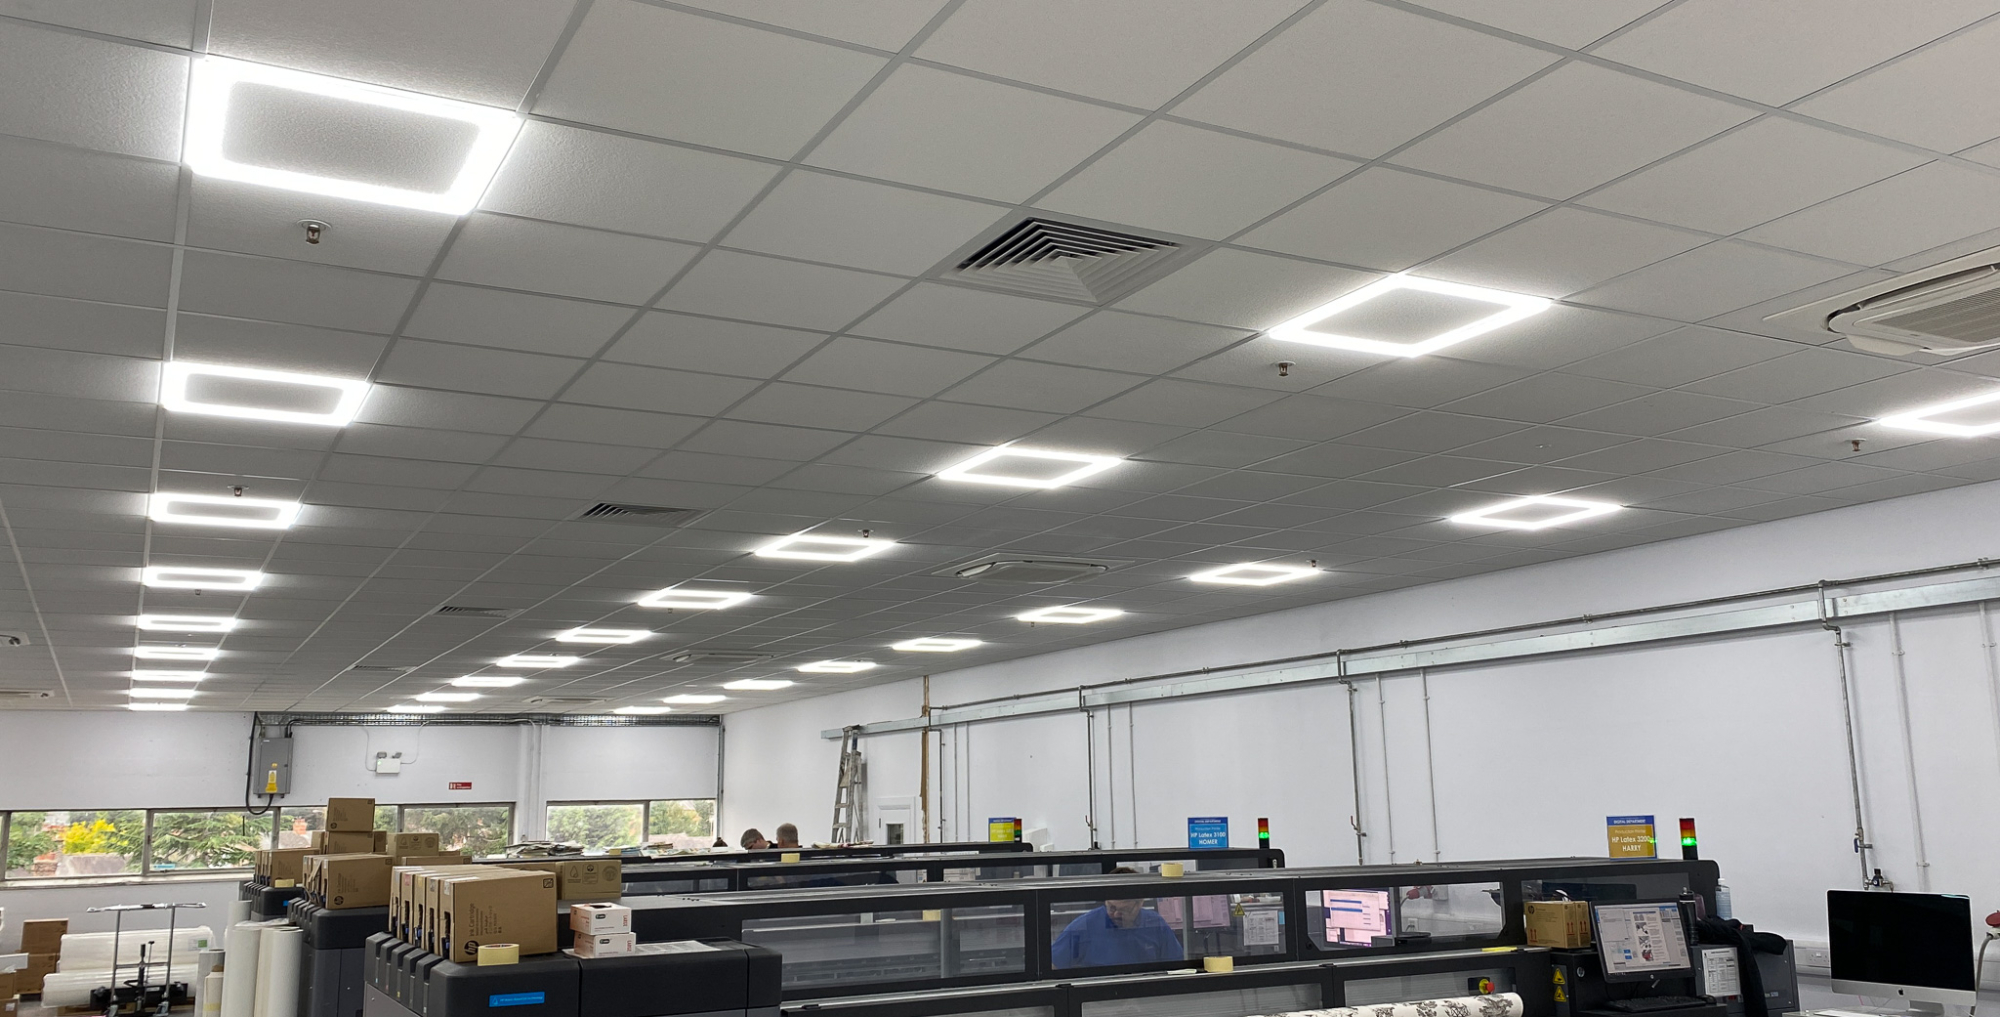 Production area with new LED Halo Panel Lighting improves wellbeing in the workplace